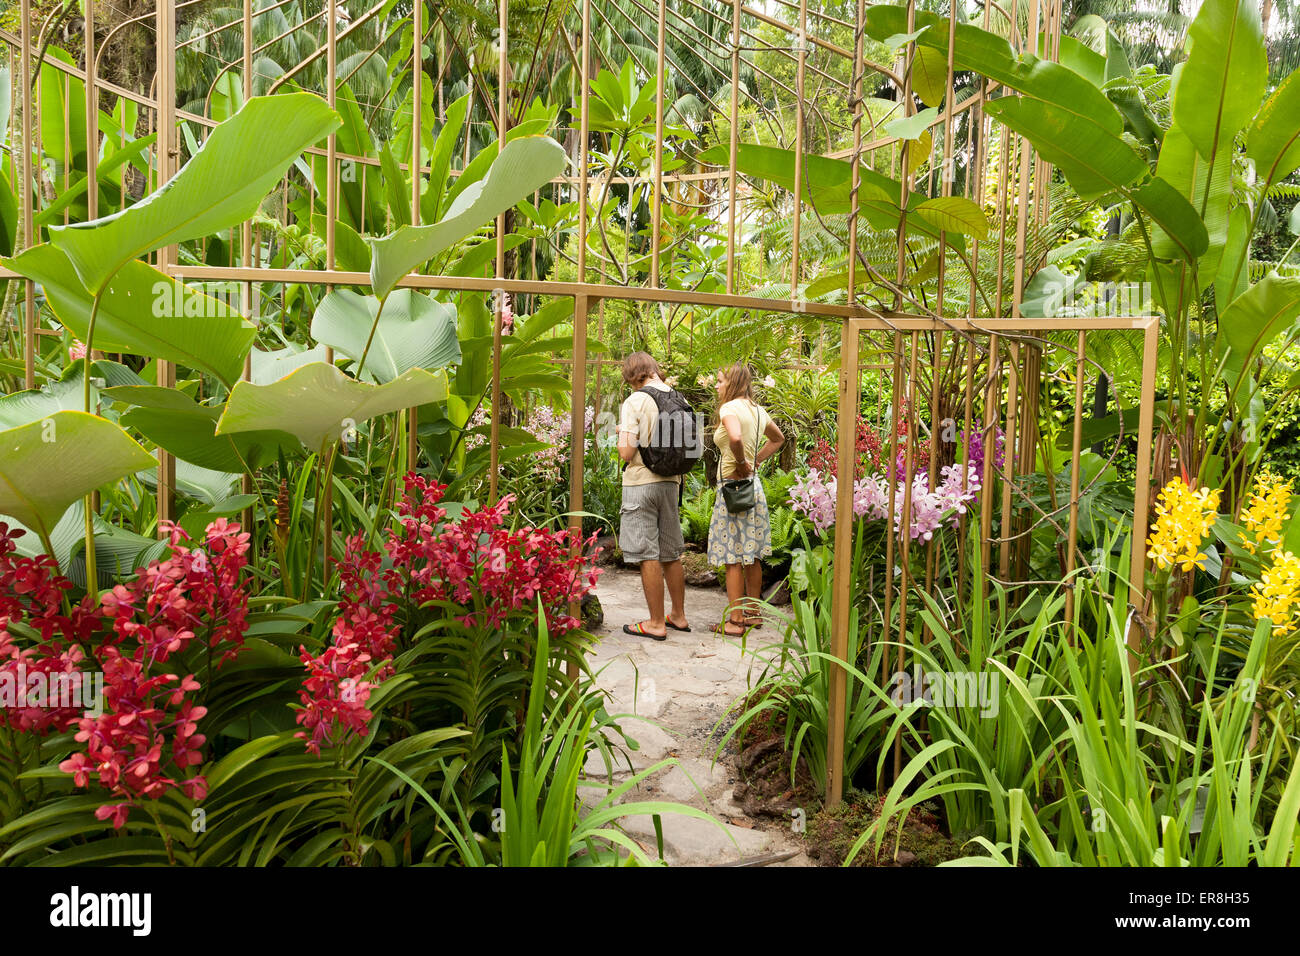 A tourist couple  looking at the orchids, National Orchid Garden, Singapore Botanic Gardens, Singapore south east Asia Stock Photo